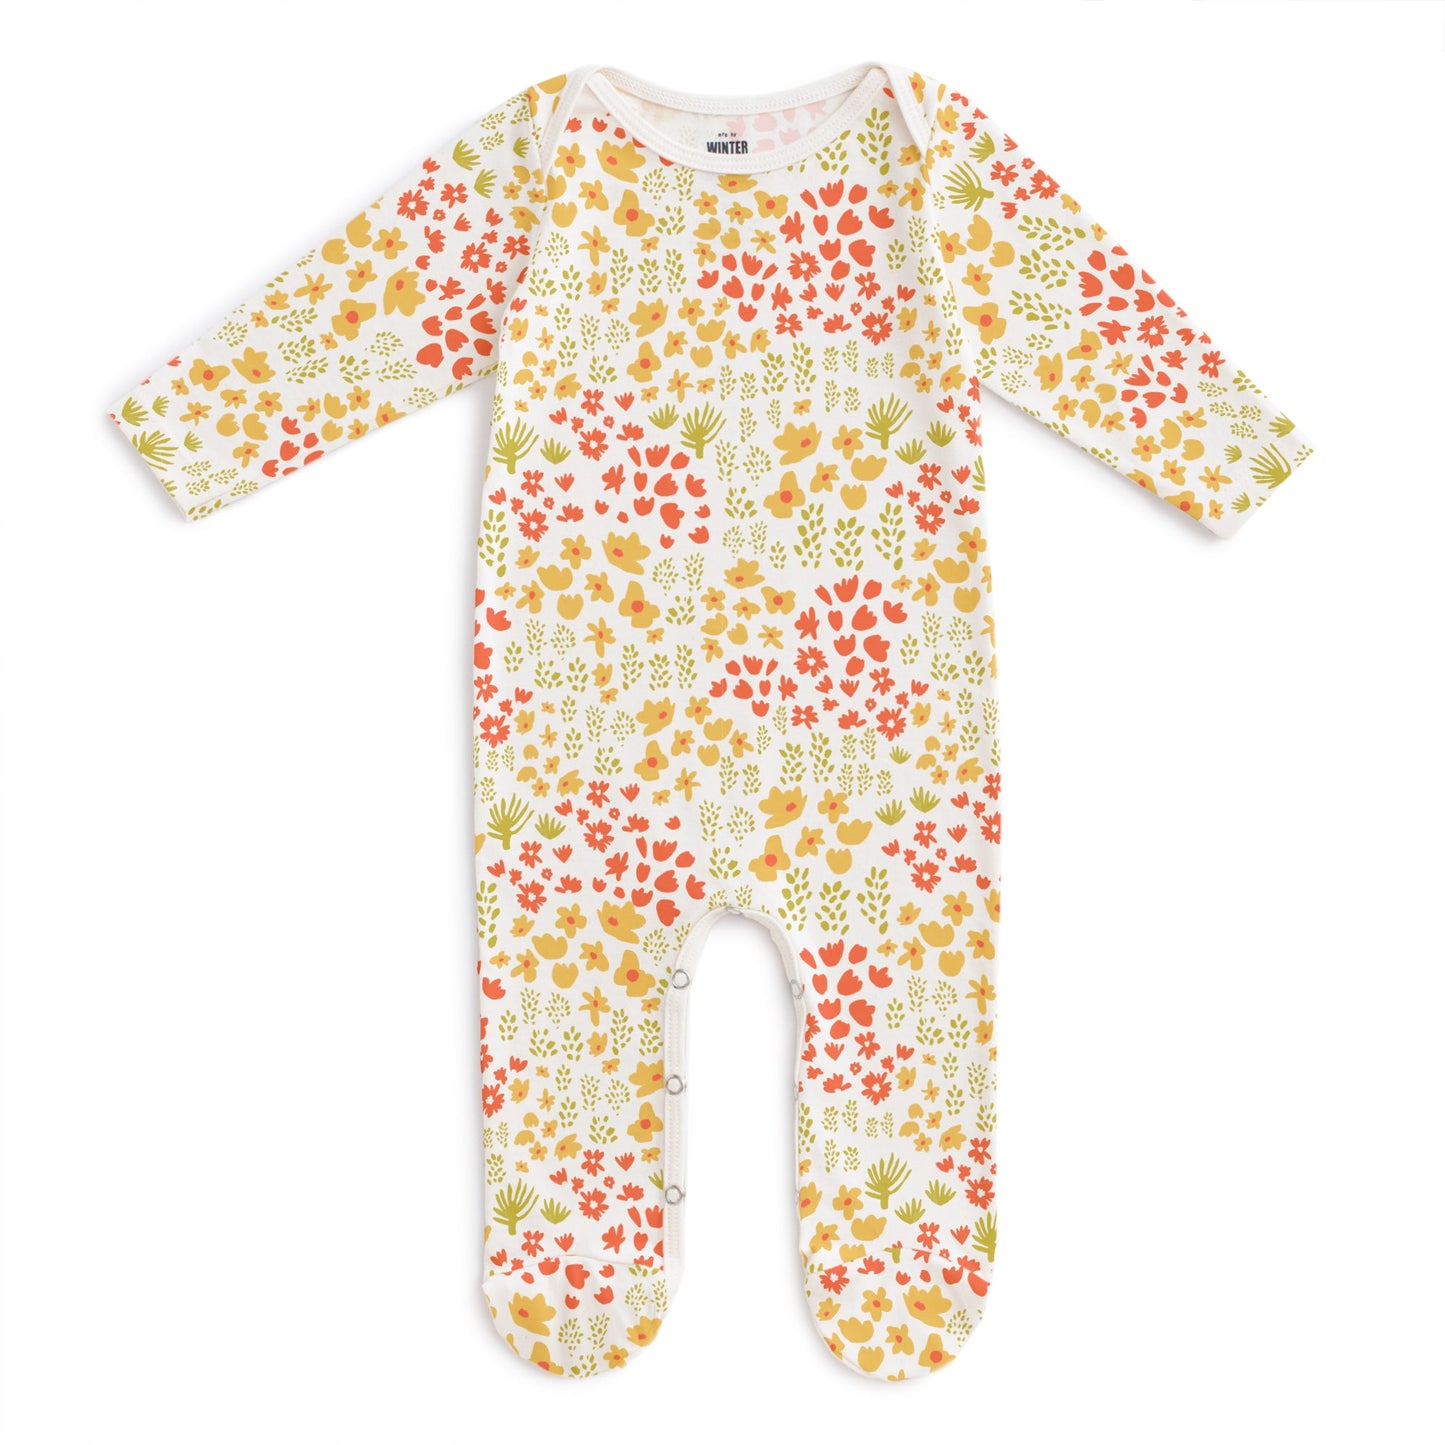 Footed Romper - Meadow Yellow, Orange & Green